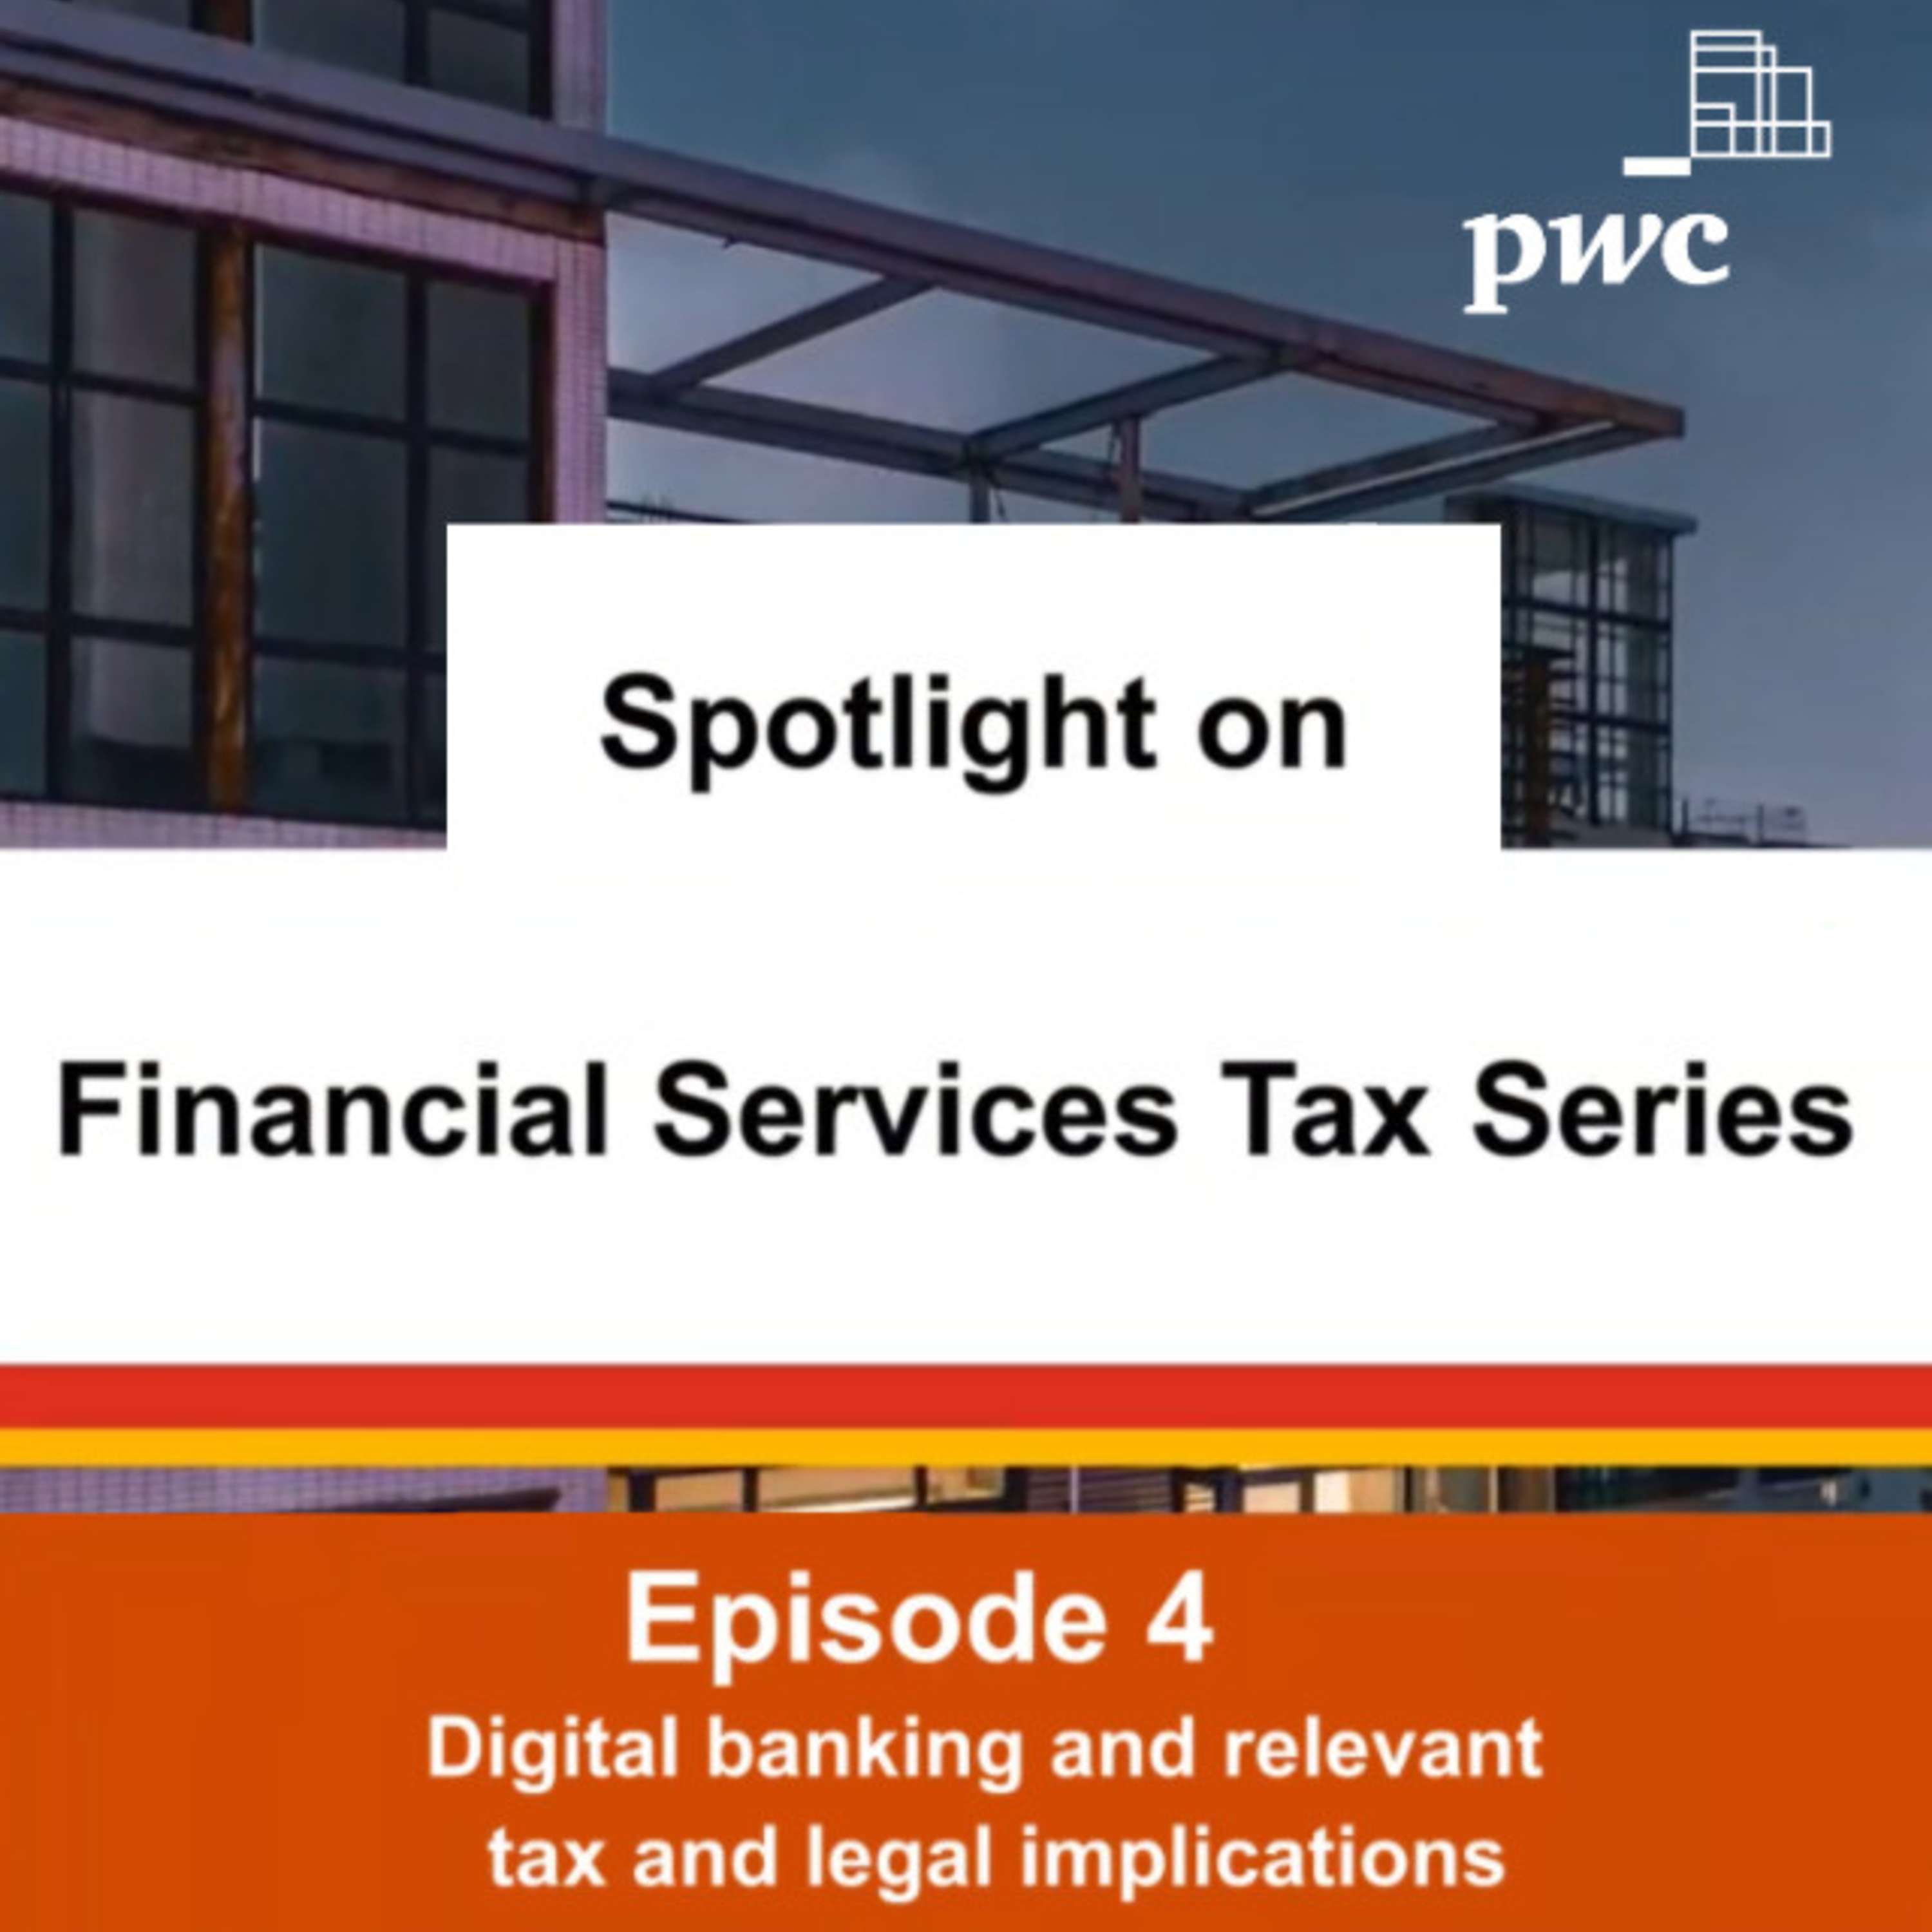 Series 1 - Episode 4: Digital banking and relevant tax and legal implications